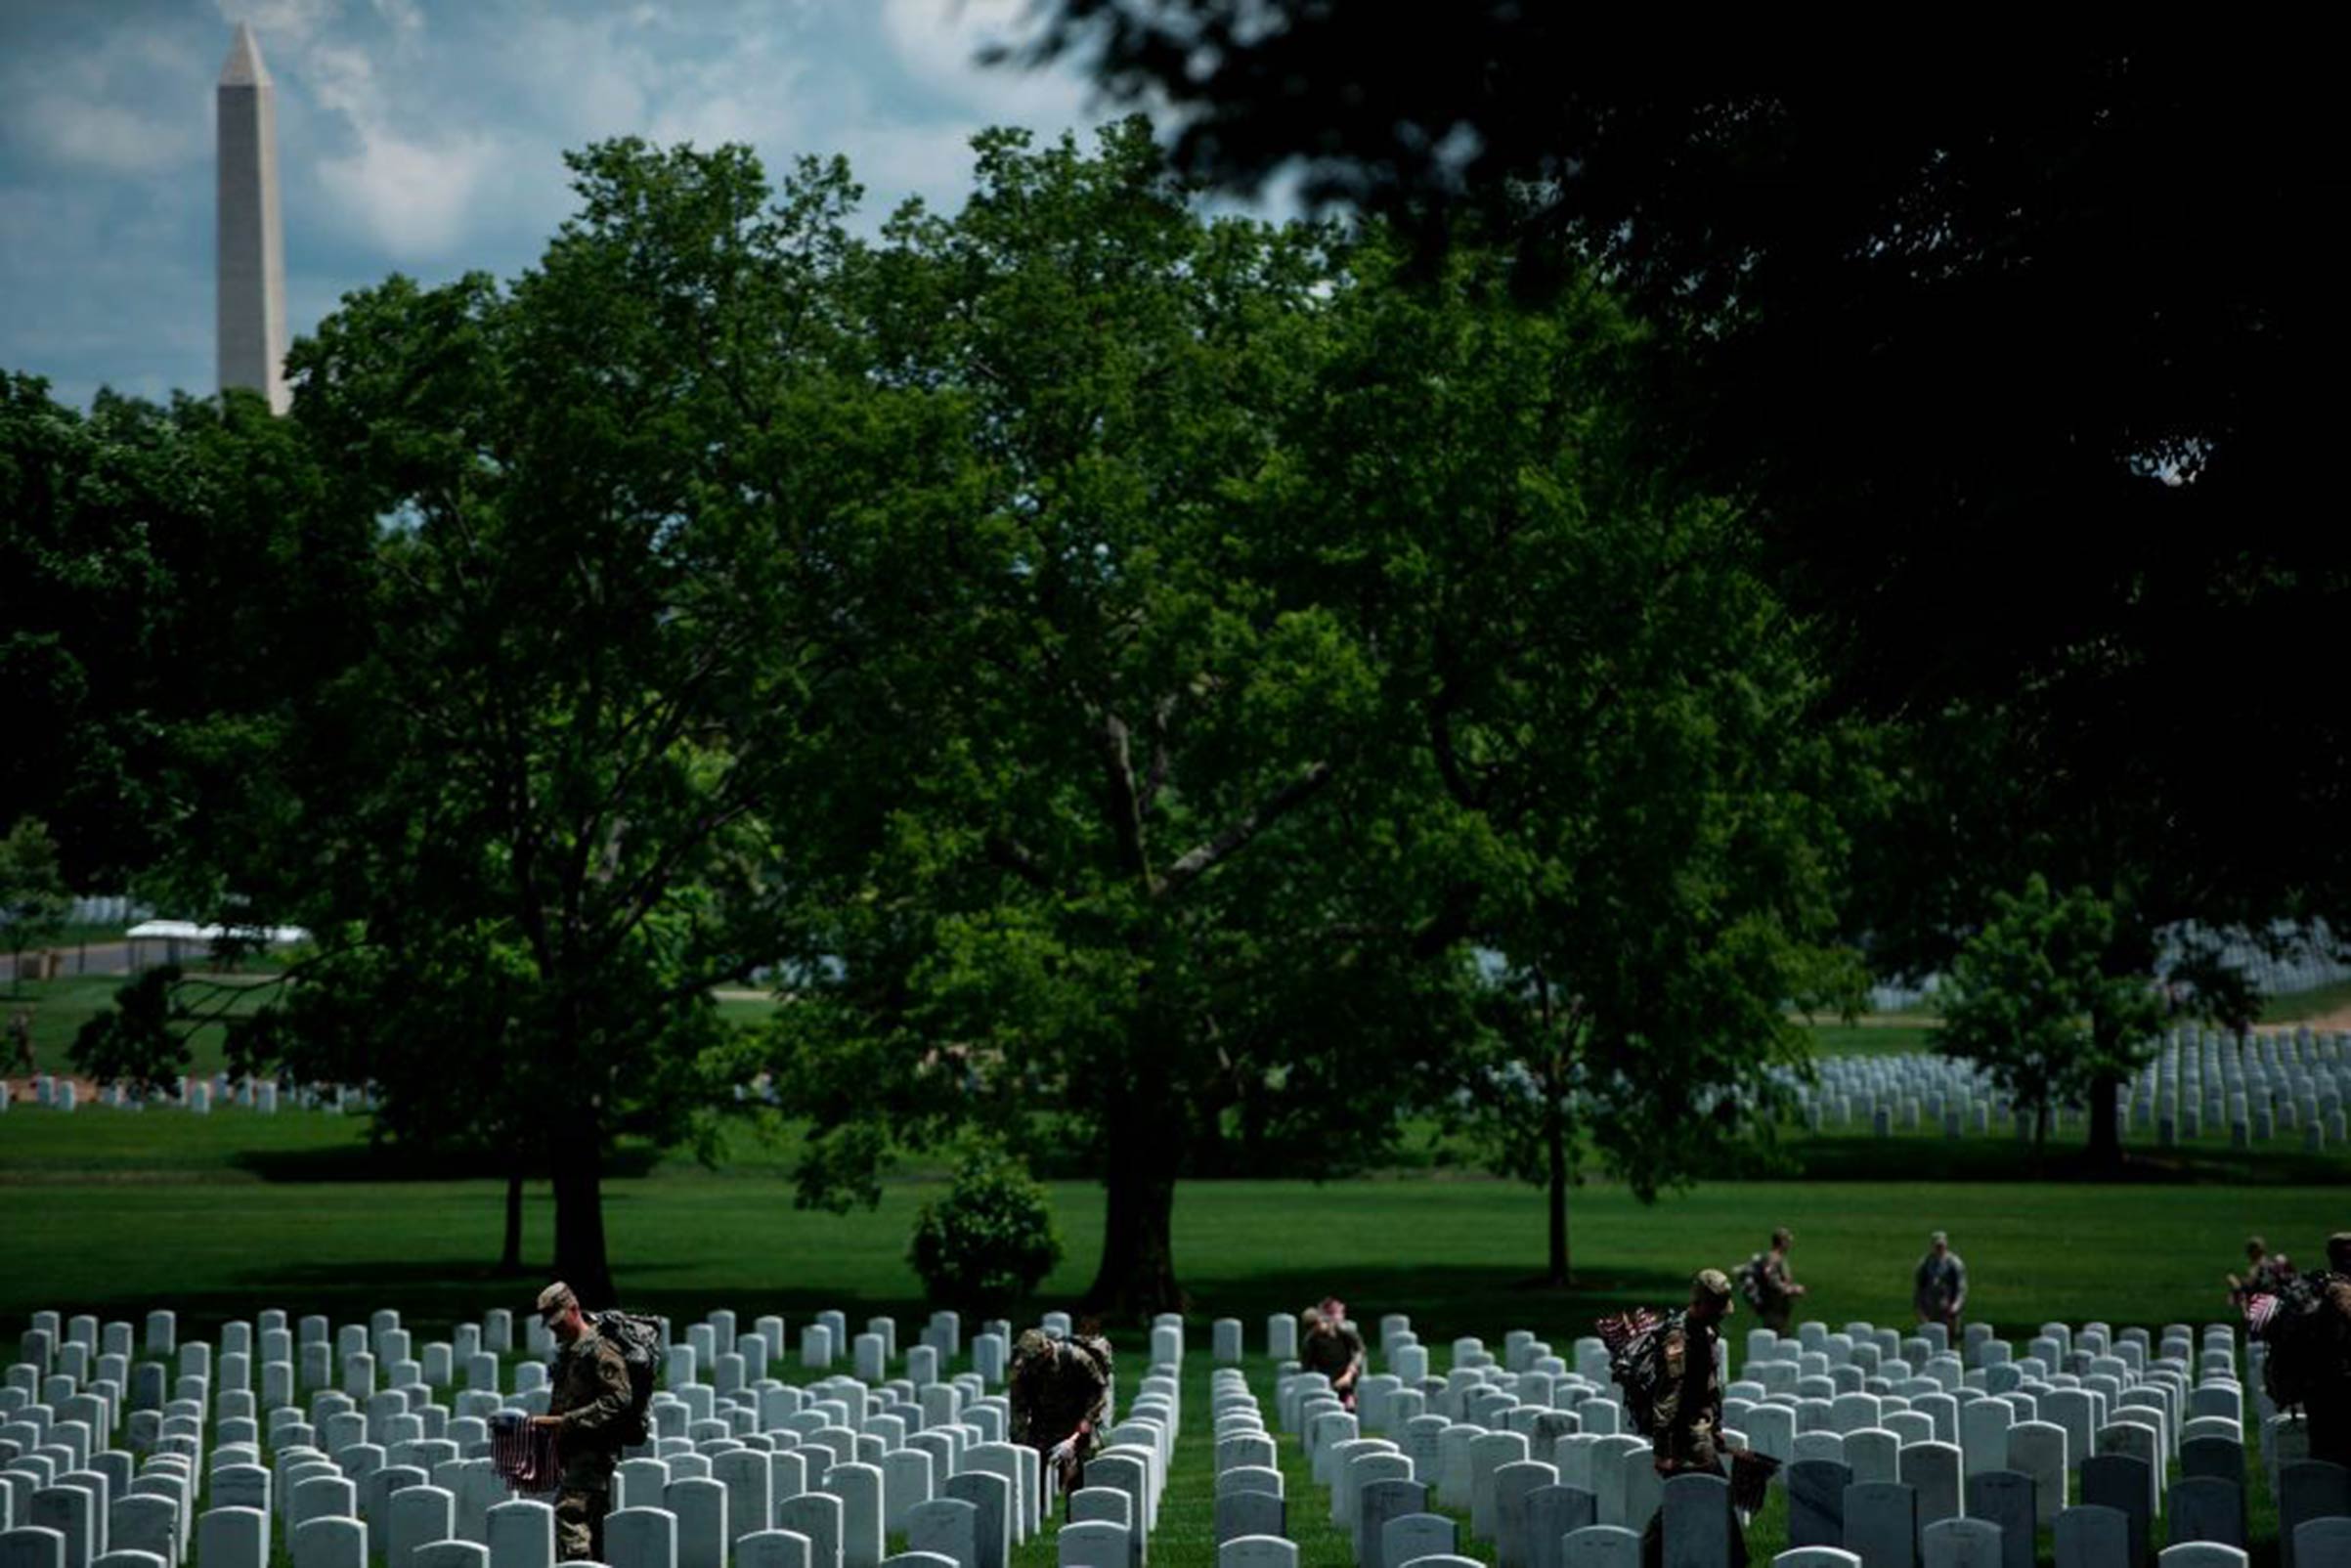 Soldiers in the Old Guard place flags at graves in Arlington National Cemetery during 